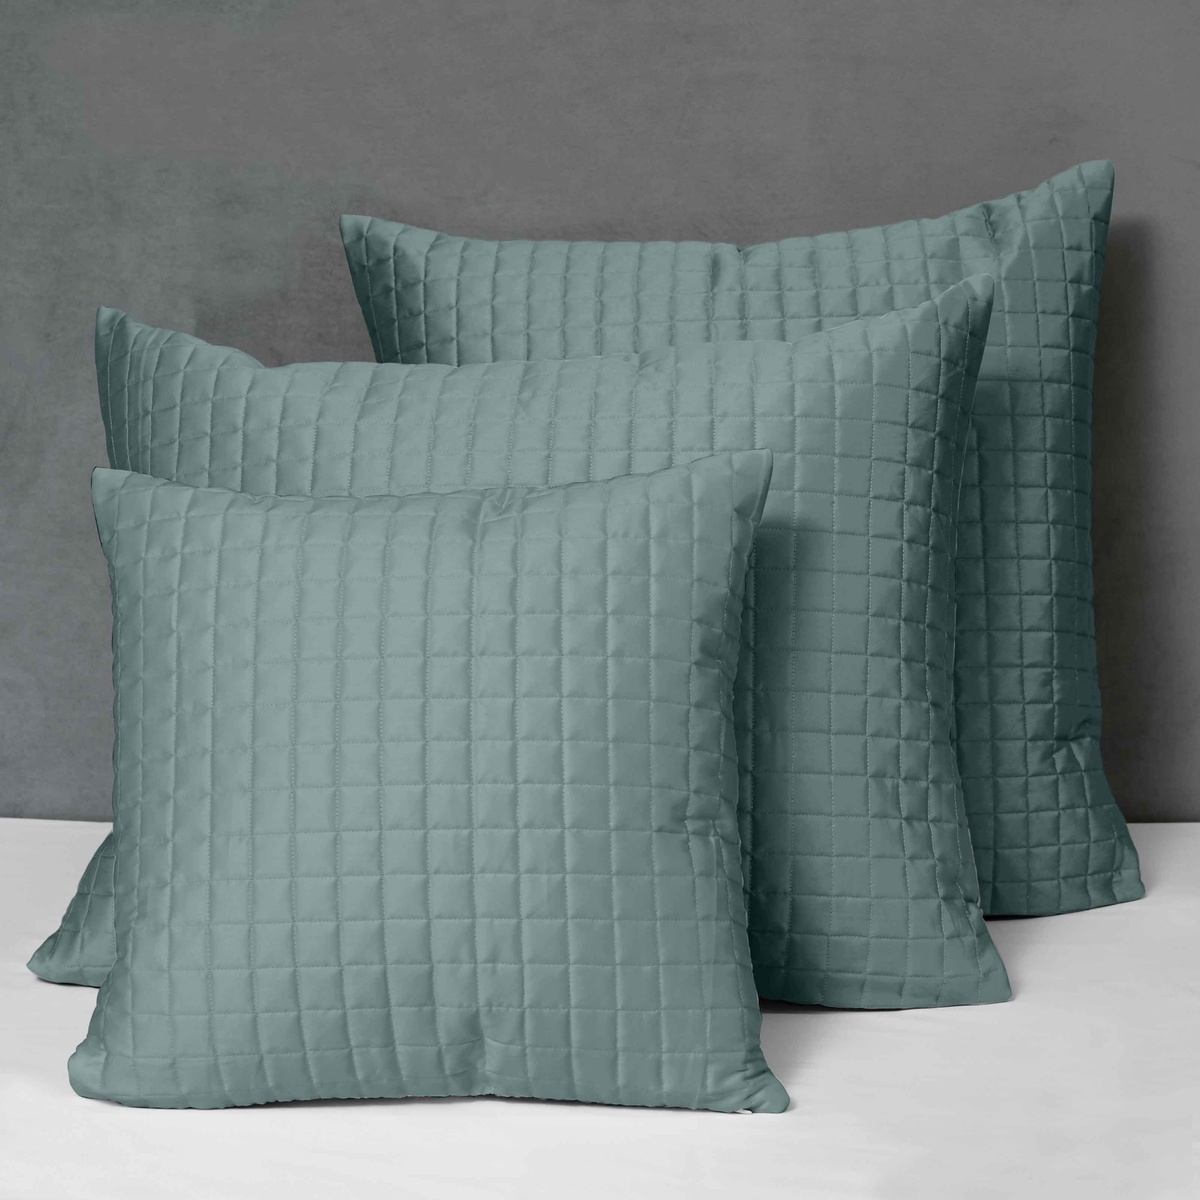 Different Sizes of Quilted Shams of Signoria Masaccio Bedding in Wilton Blue Color